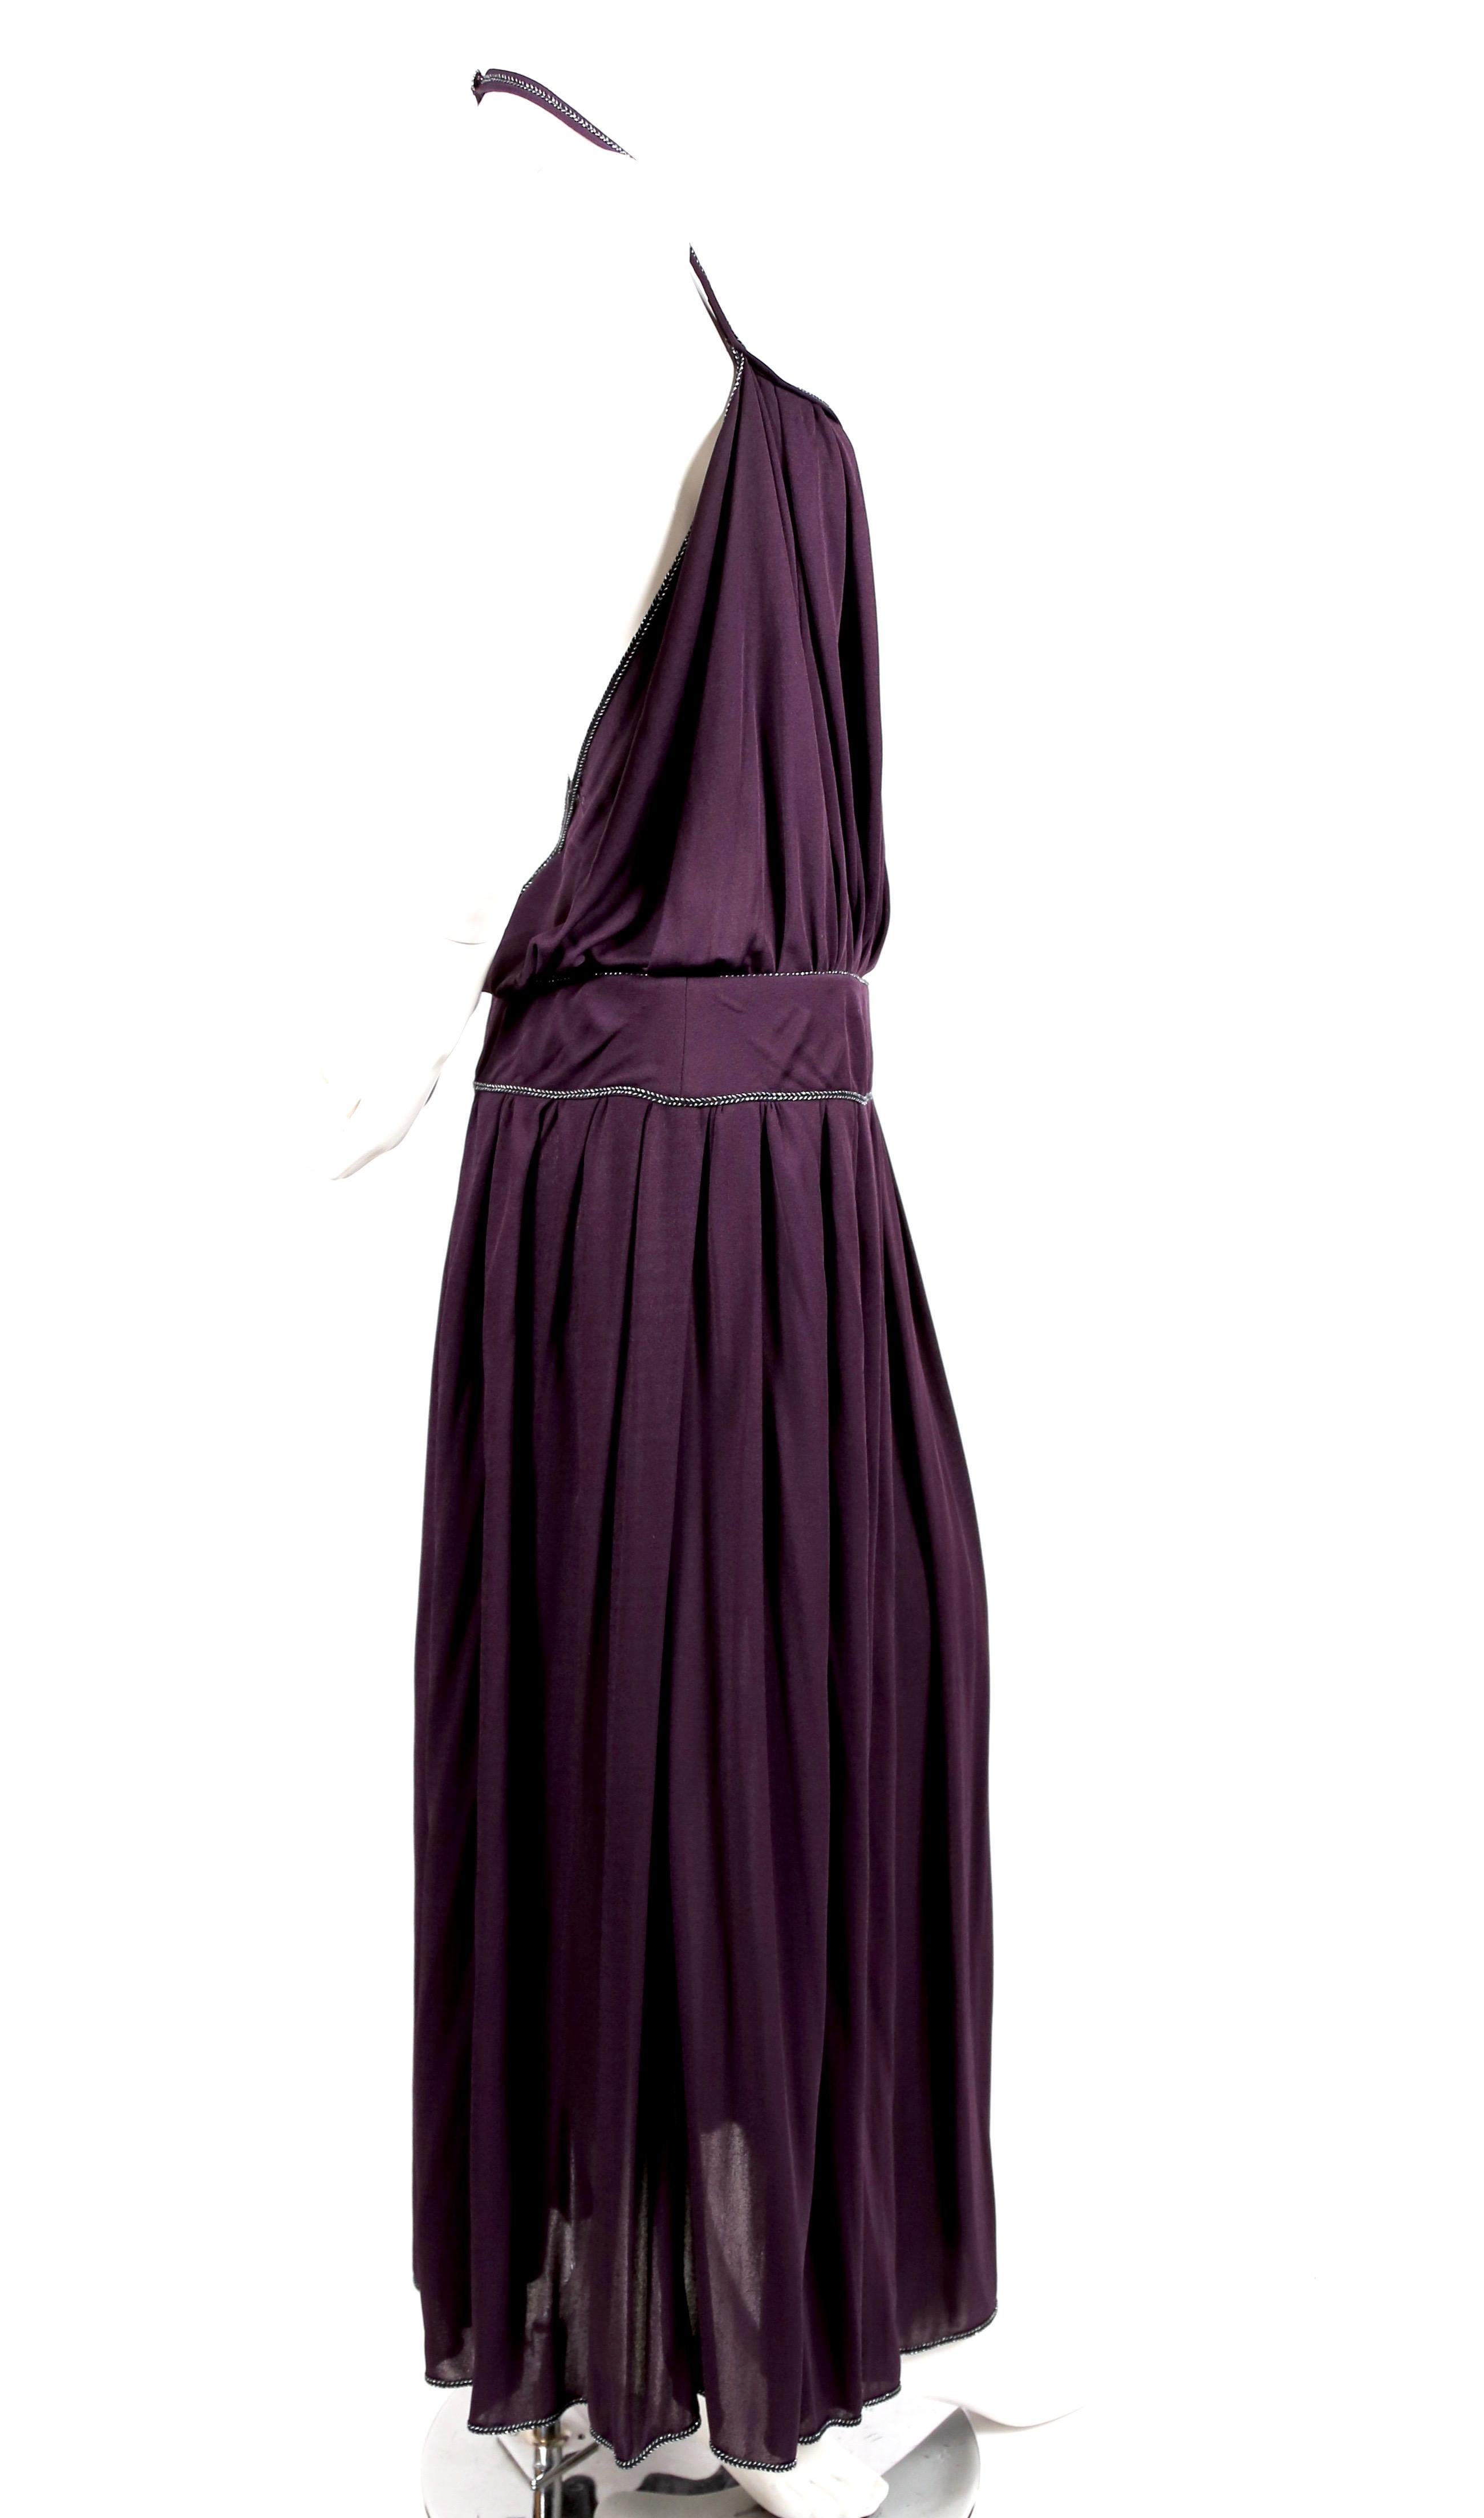 Purple viscose jersey gown with metallic silver toned trim and extra high thigh slit from Bill Gibb dating to the 1970's. Blouson bodice. Halter neckline with decorative button at back of neck. Dress is labeled a UK 12 (US 8) however this dress runs